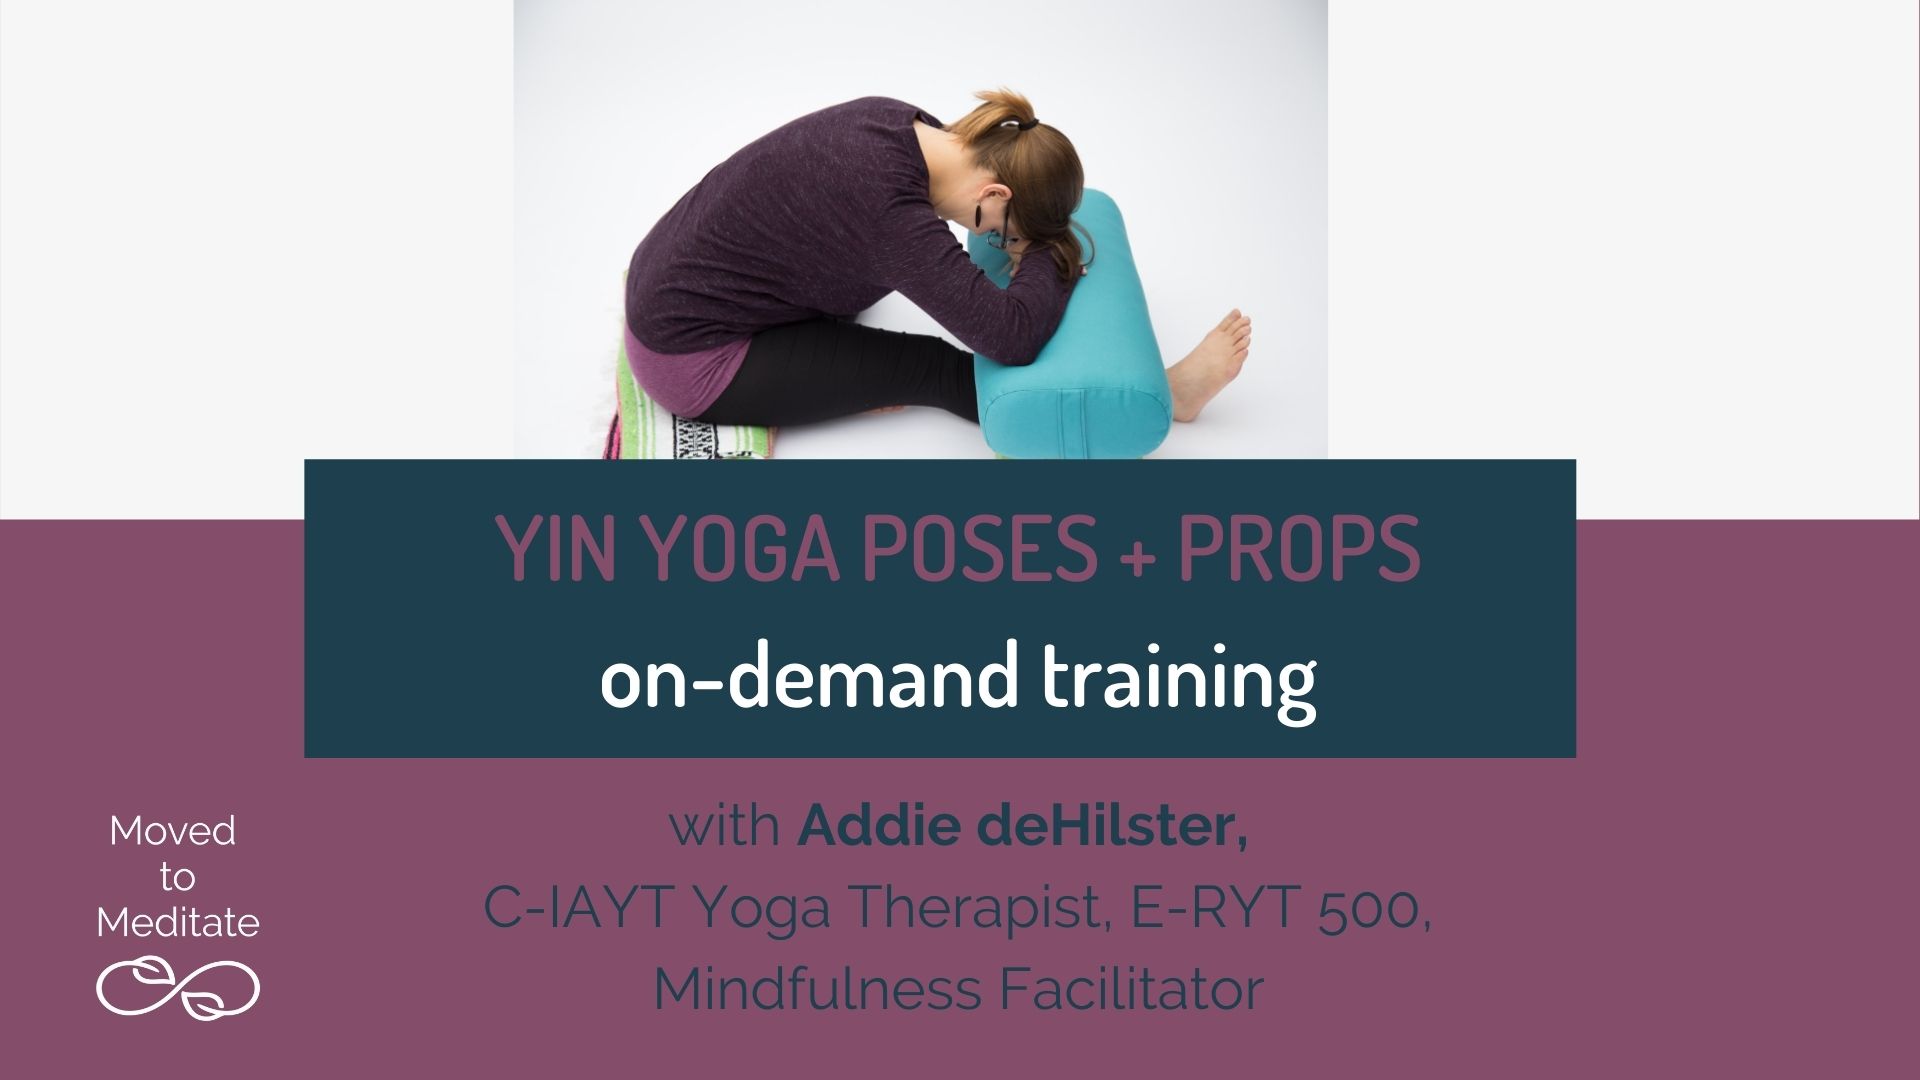 Addie deHilster doing a Yin Yoga pose with props for teacher training online